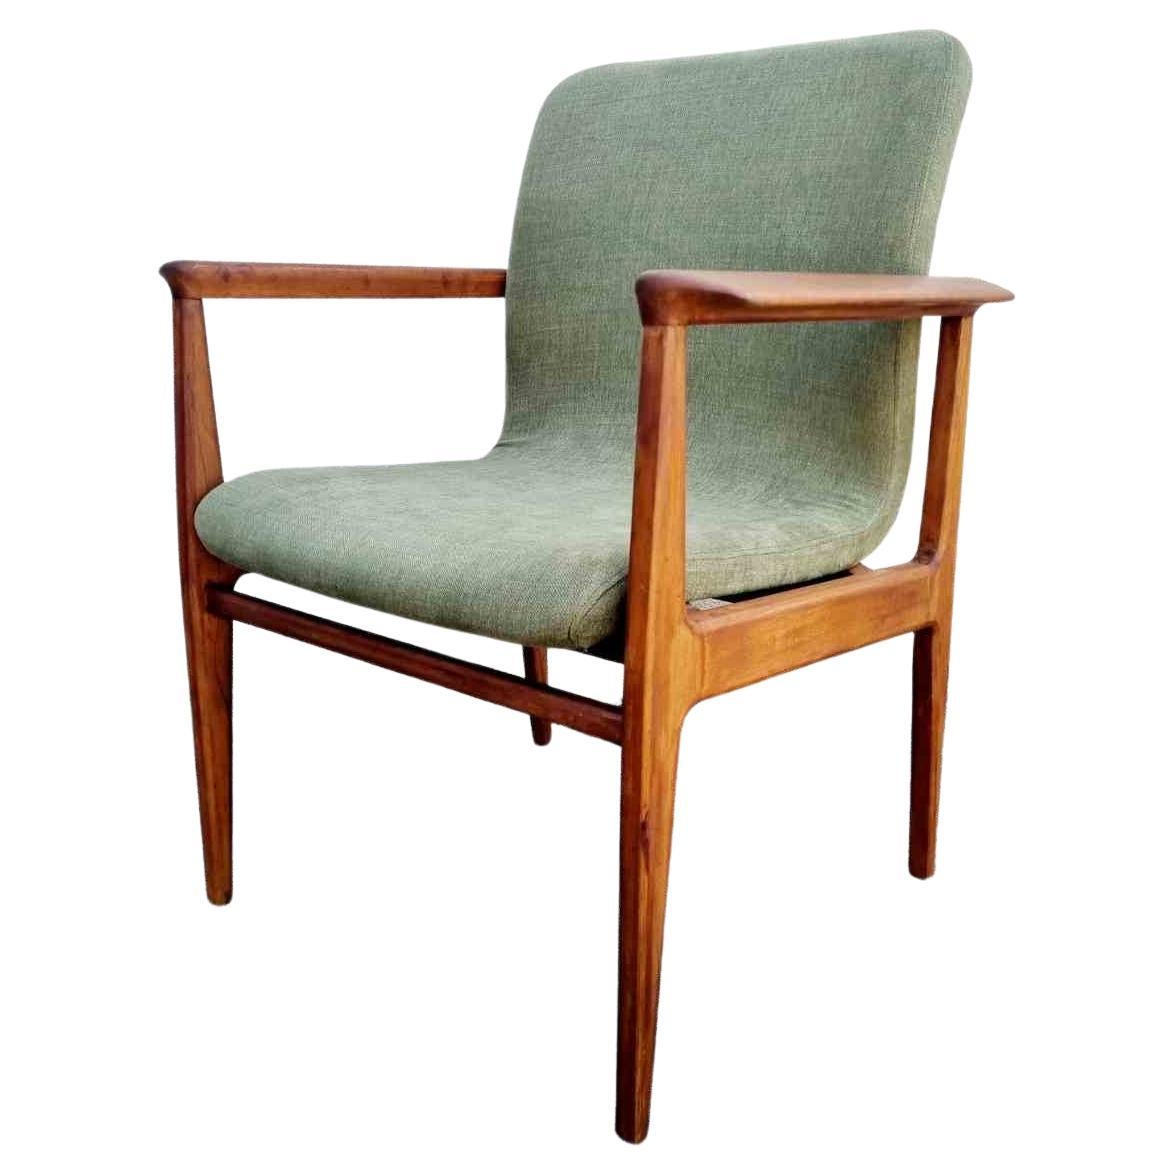 Mid century modern armchair made by Anonima Castelli in the 60s.
Armchair in solid beech.
It was reupholstored

Produced by Anonima Castelli in about 1960, see label in photo.

Excellent condition, fully restored and reupholstored with new fabric.